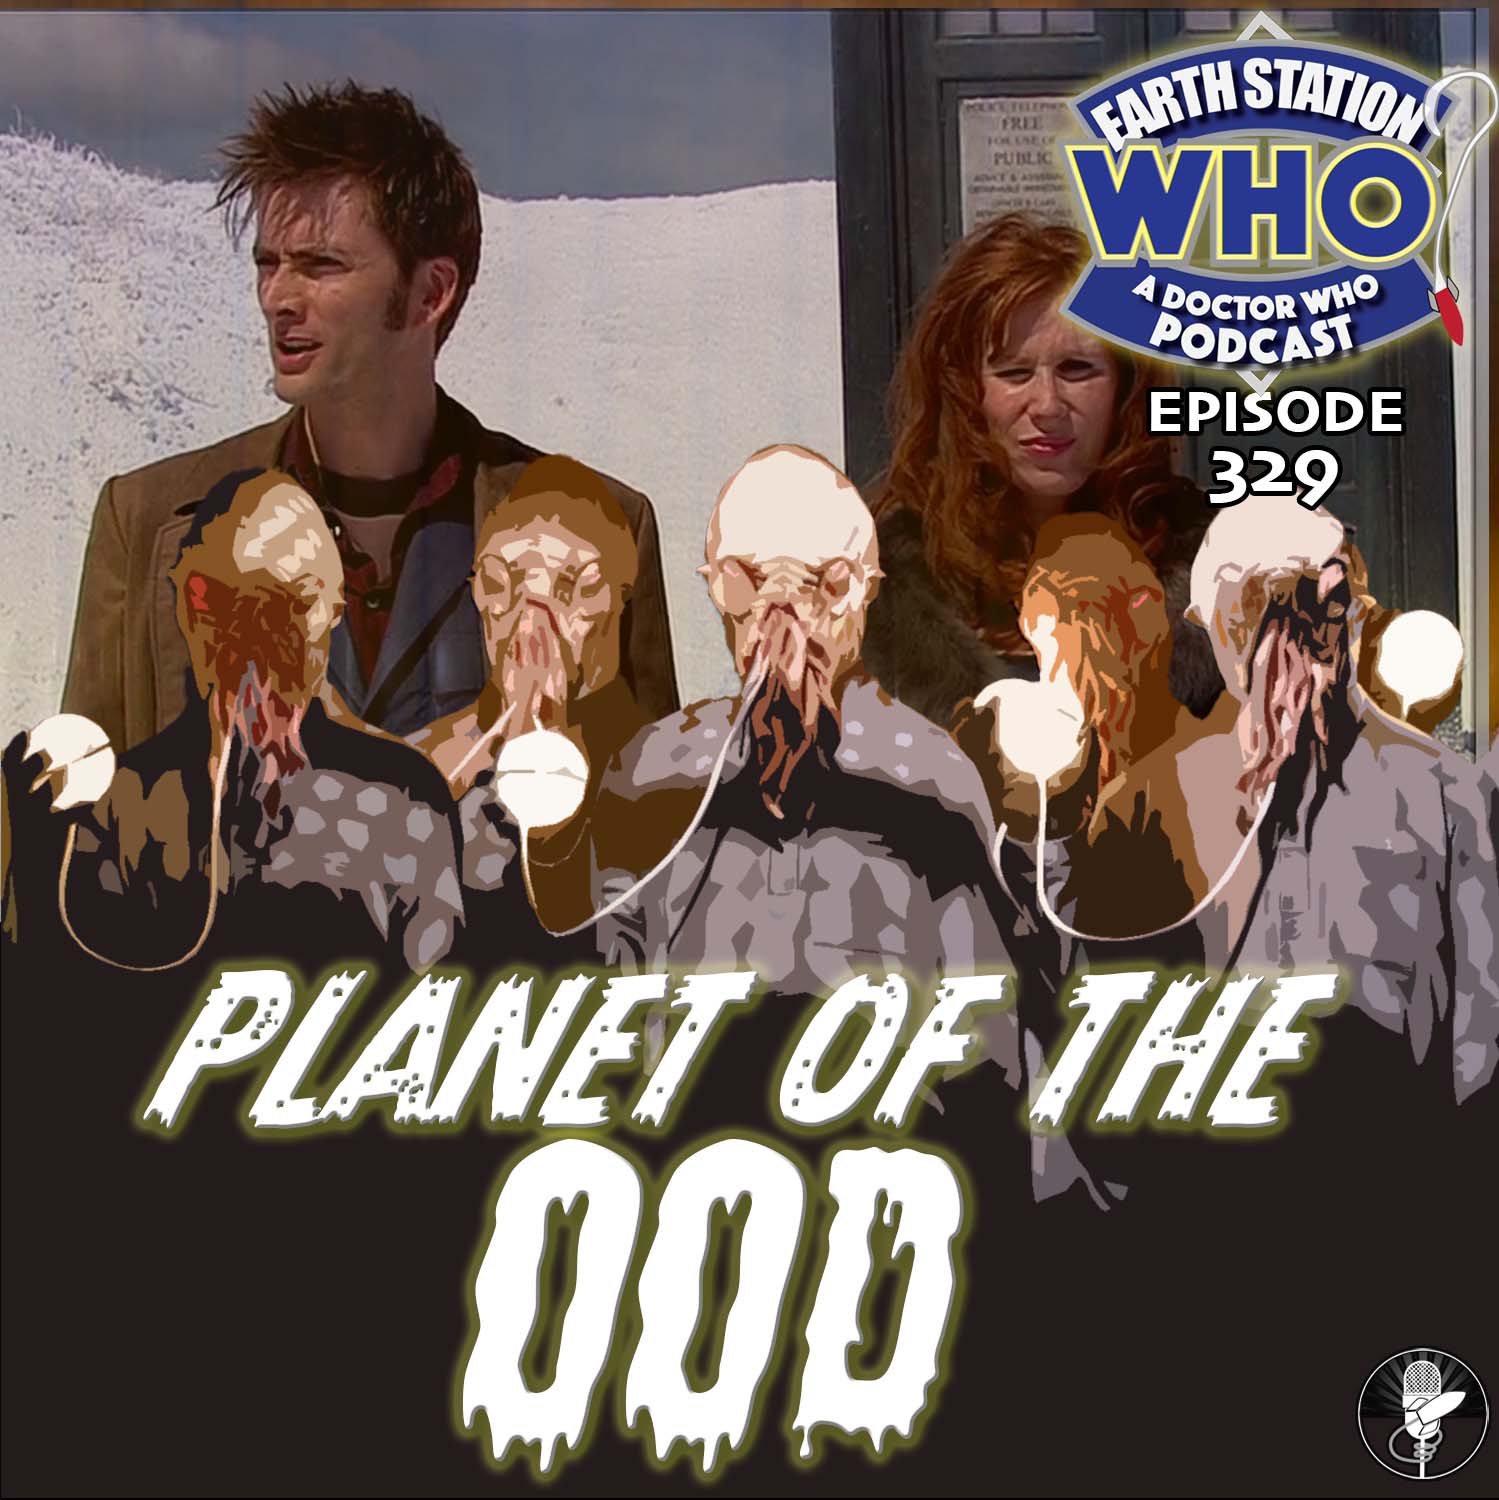 Earth Station Who Ep 329 - Planet of the Ood